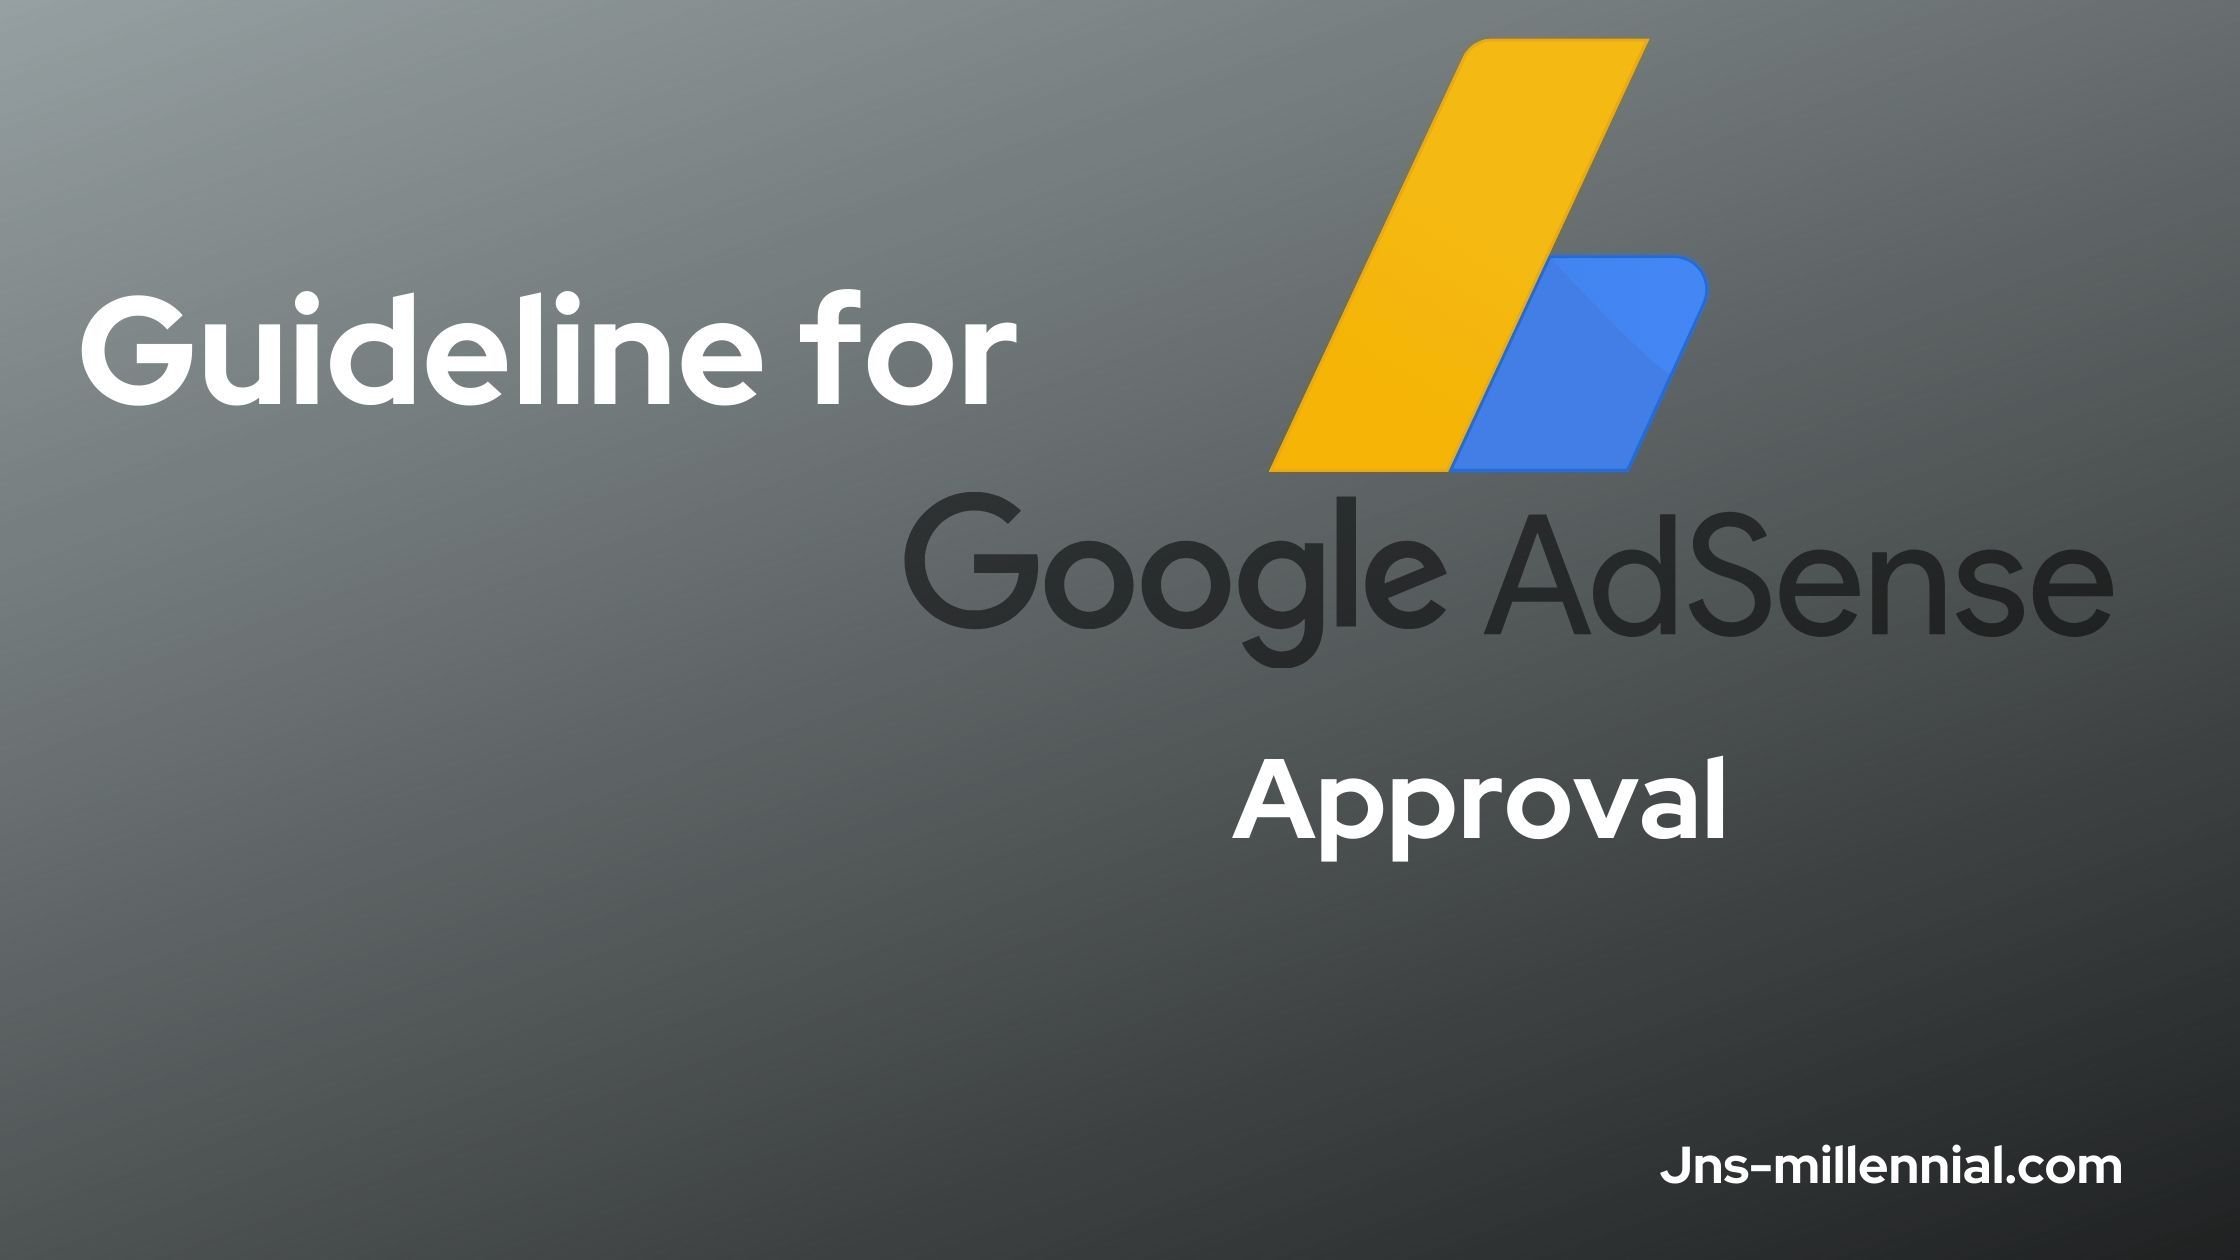 Guideline for Google AdSense Account Approval